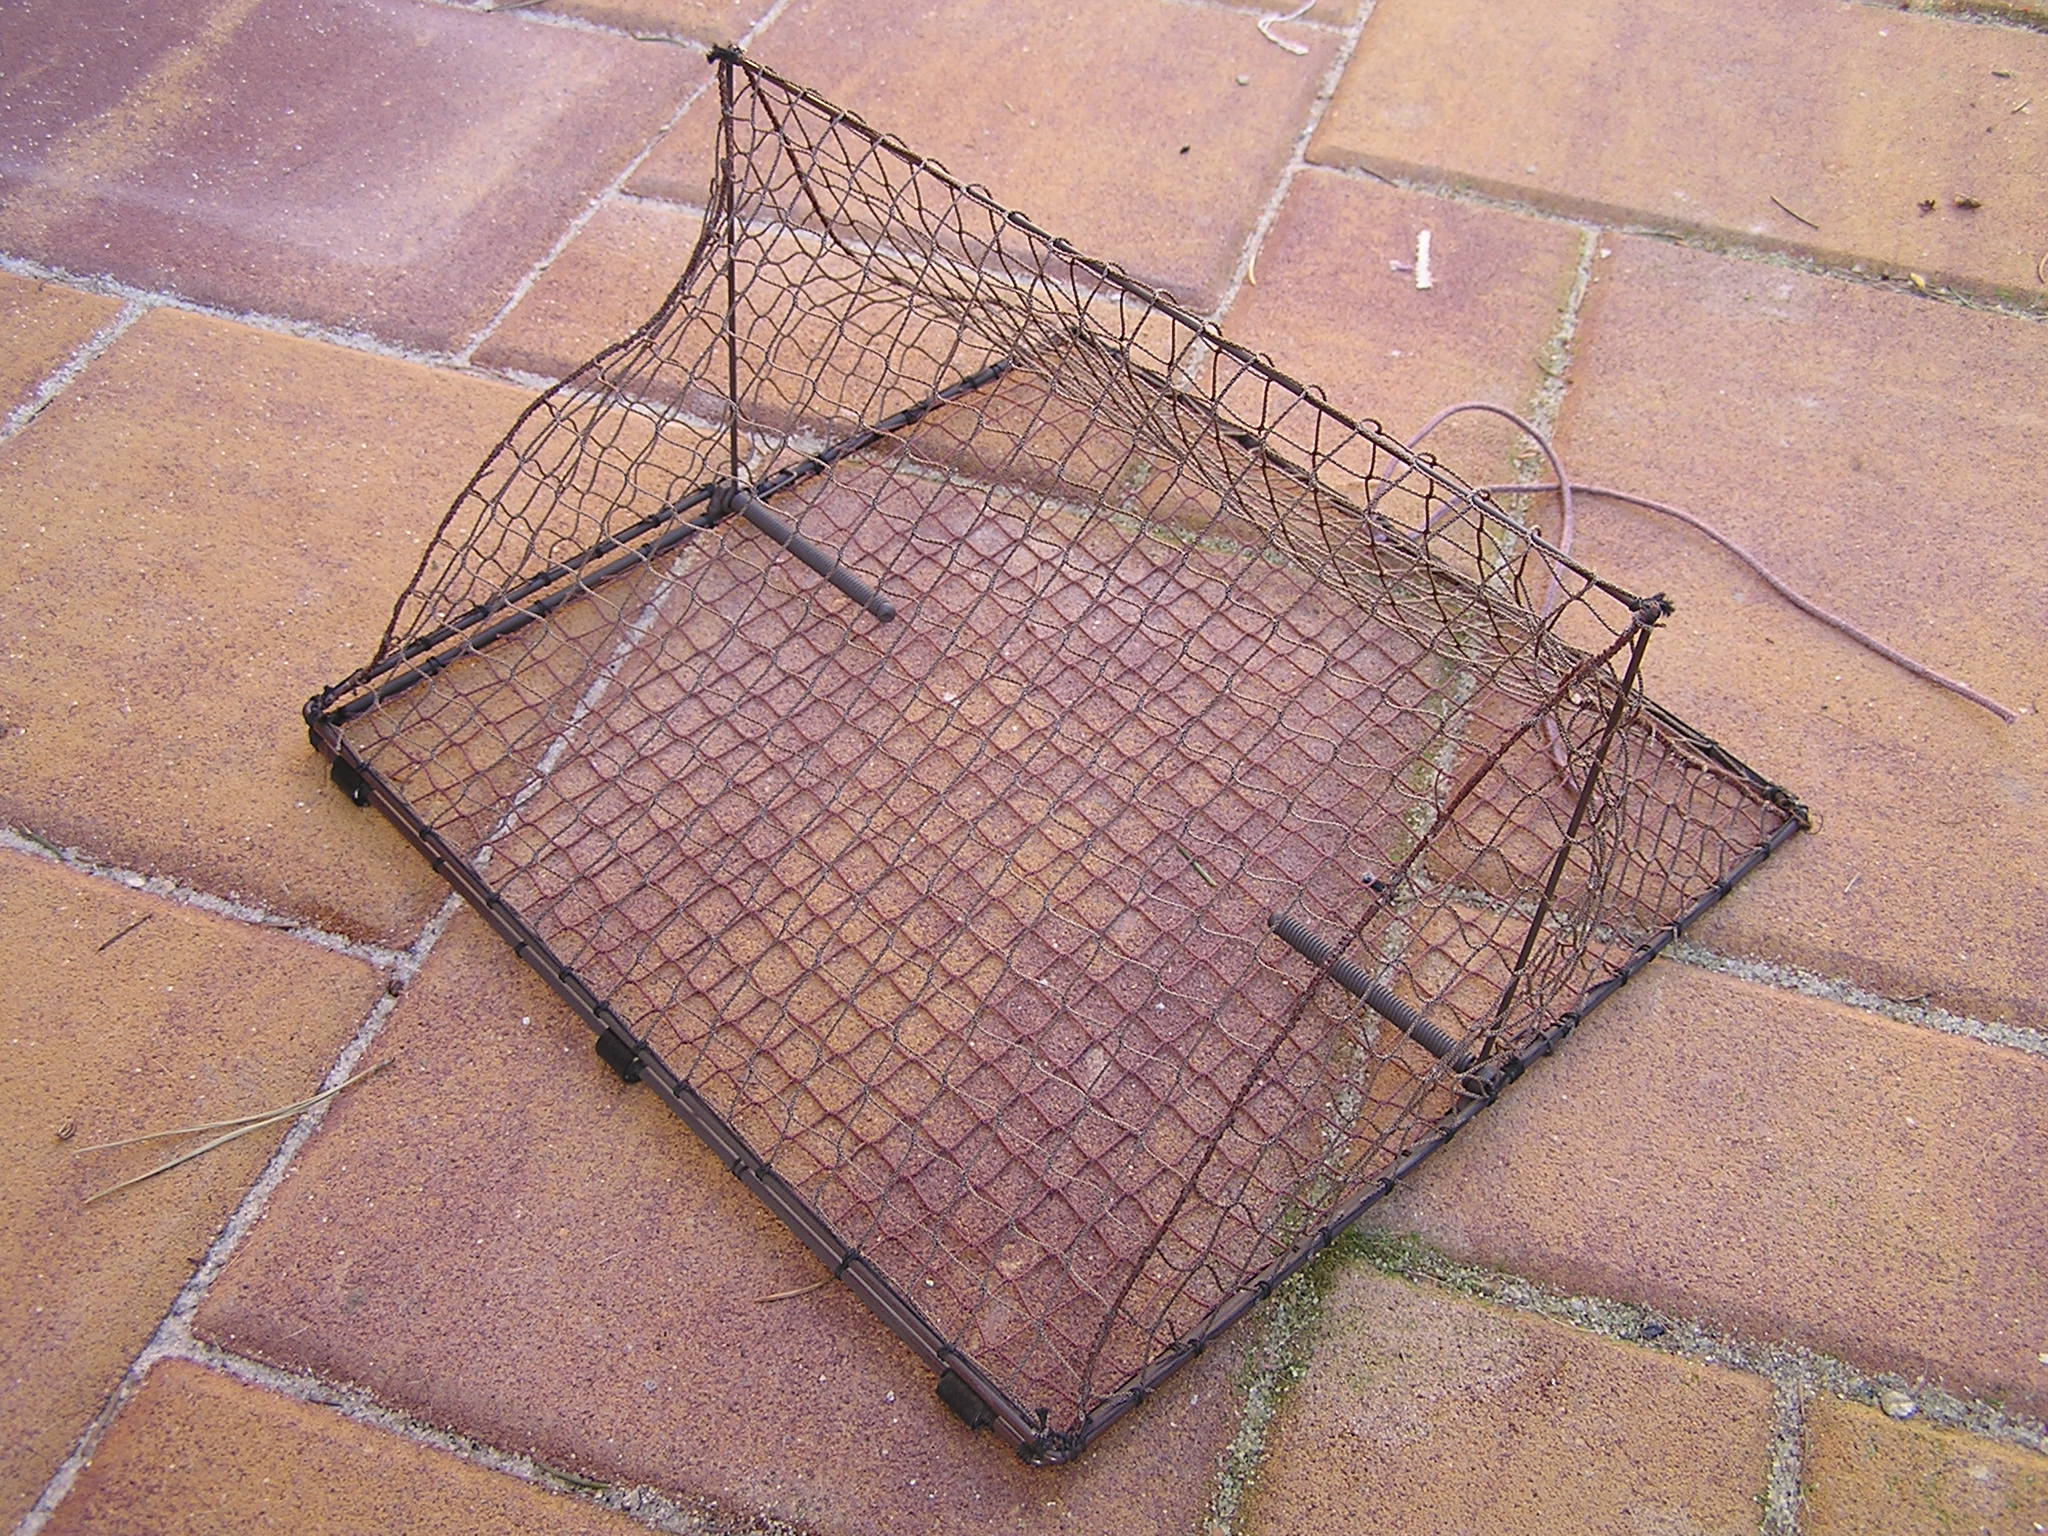 TSB25 - Tent spring trap for trapping small birds. Base dimensions: 25x25 cm